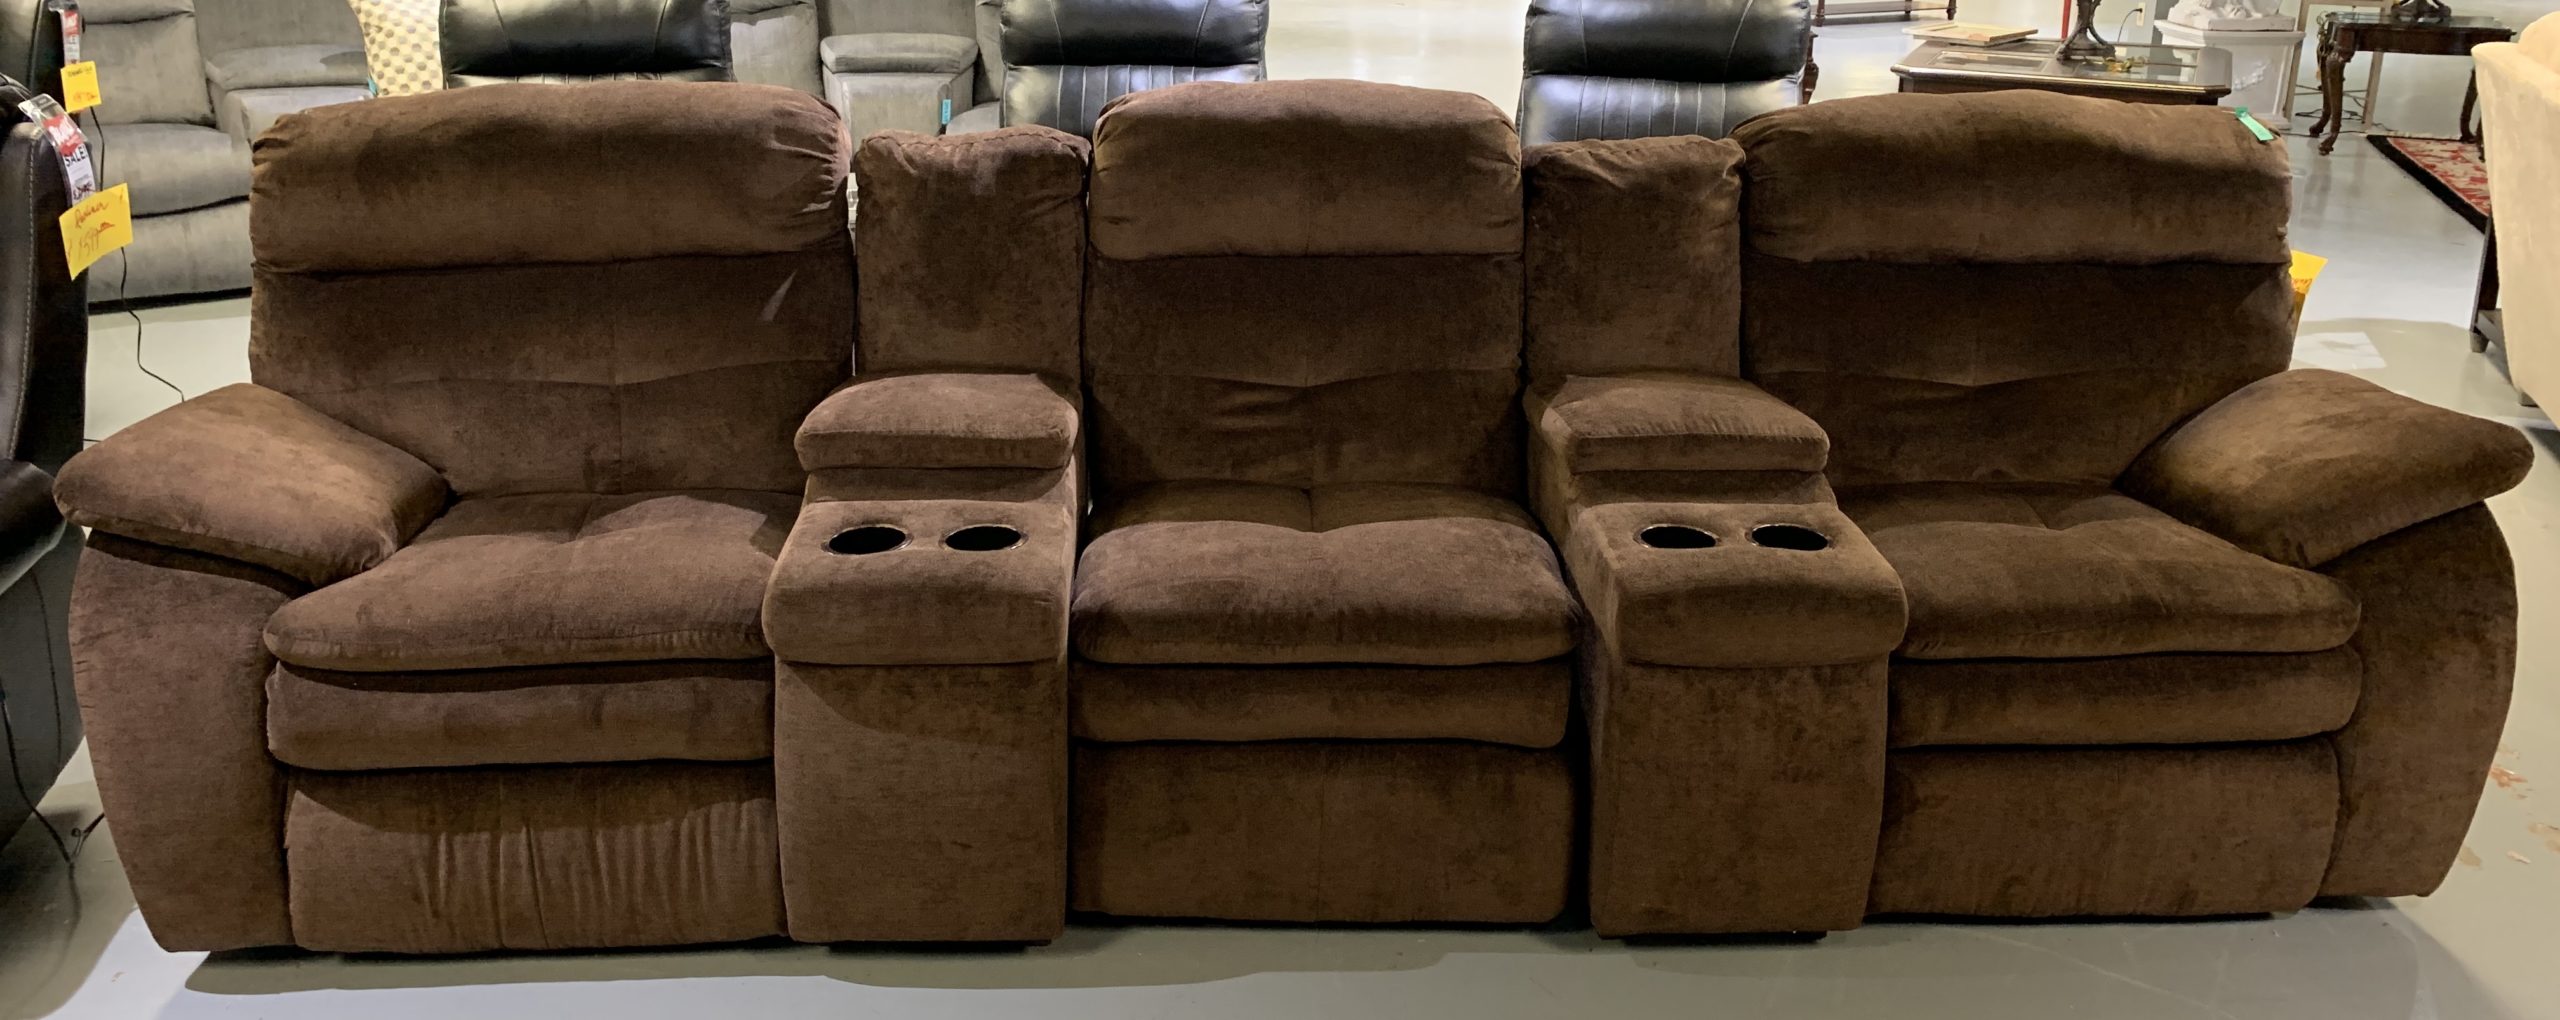 Triple Recliner Sofa With Cup Holders